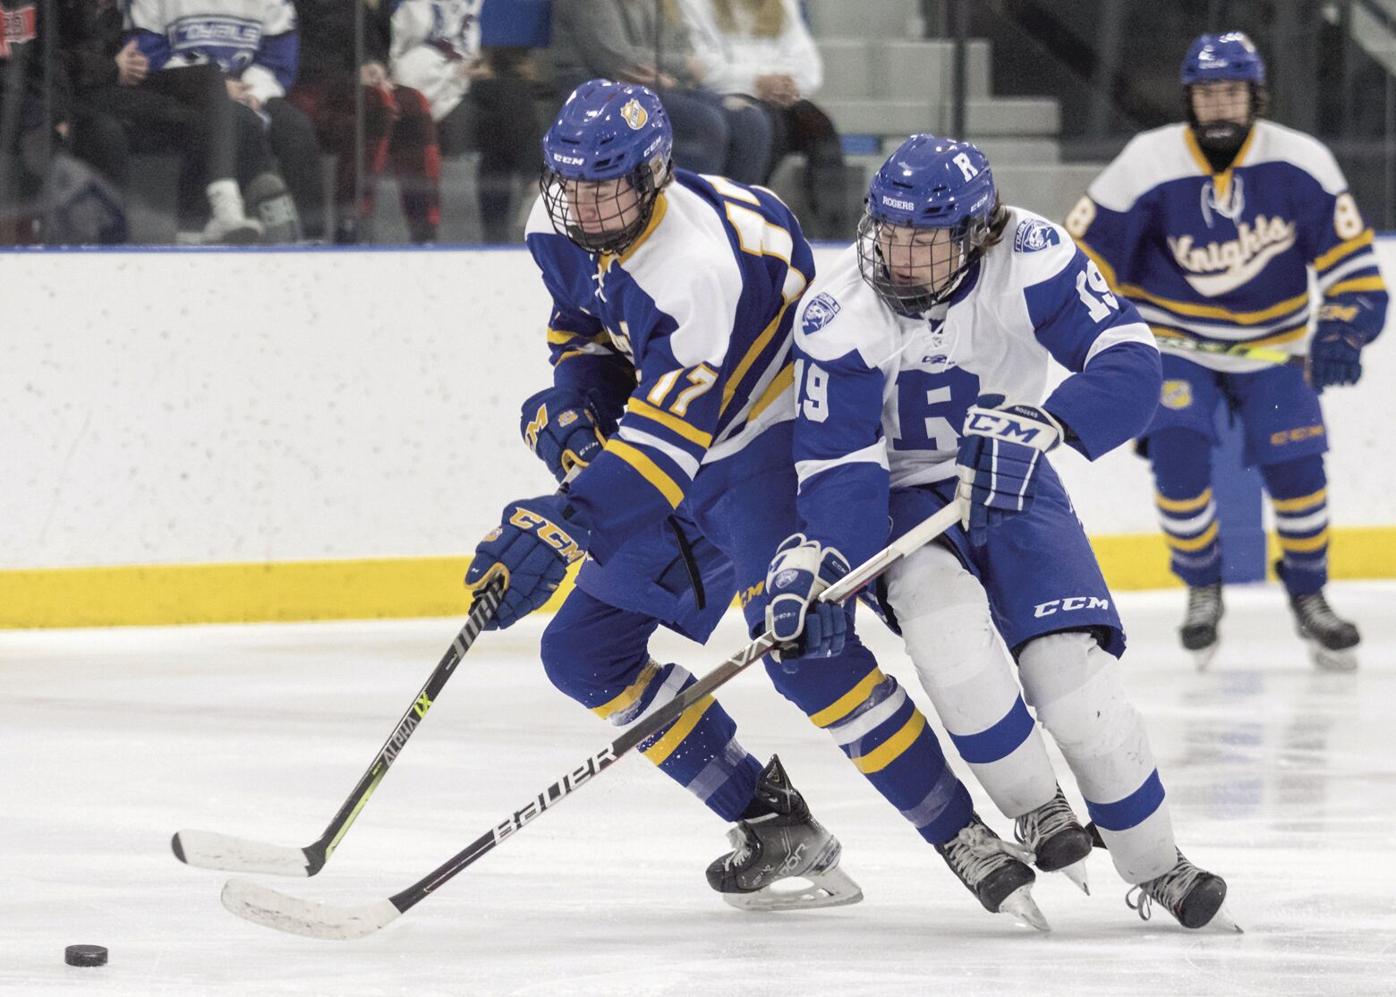 Royals boys hockey team sends game to overtime